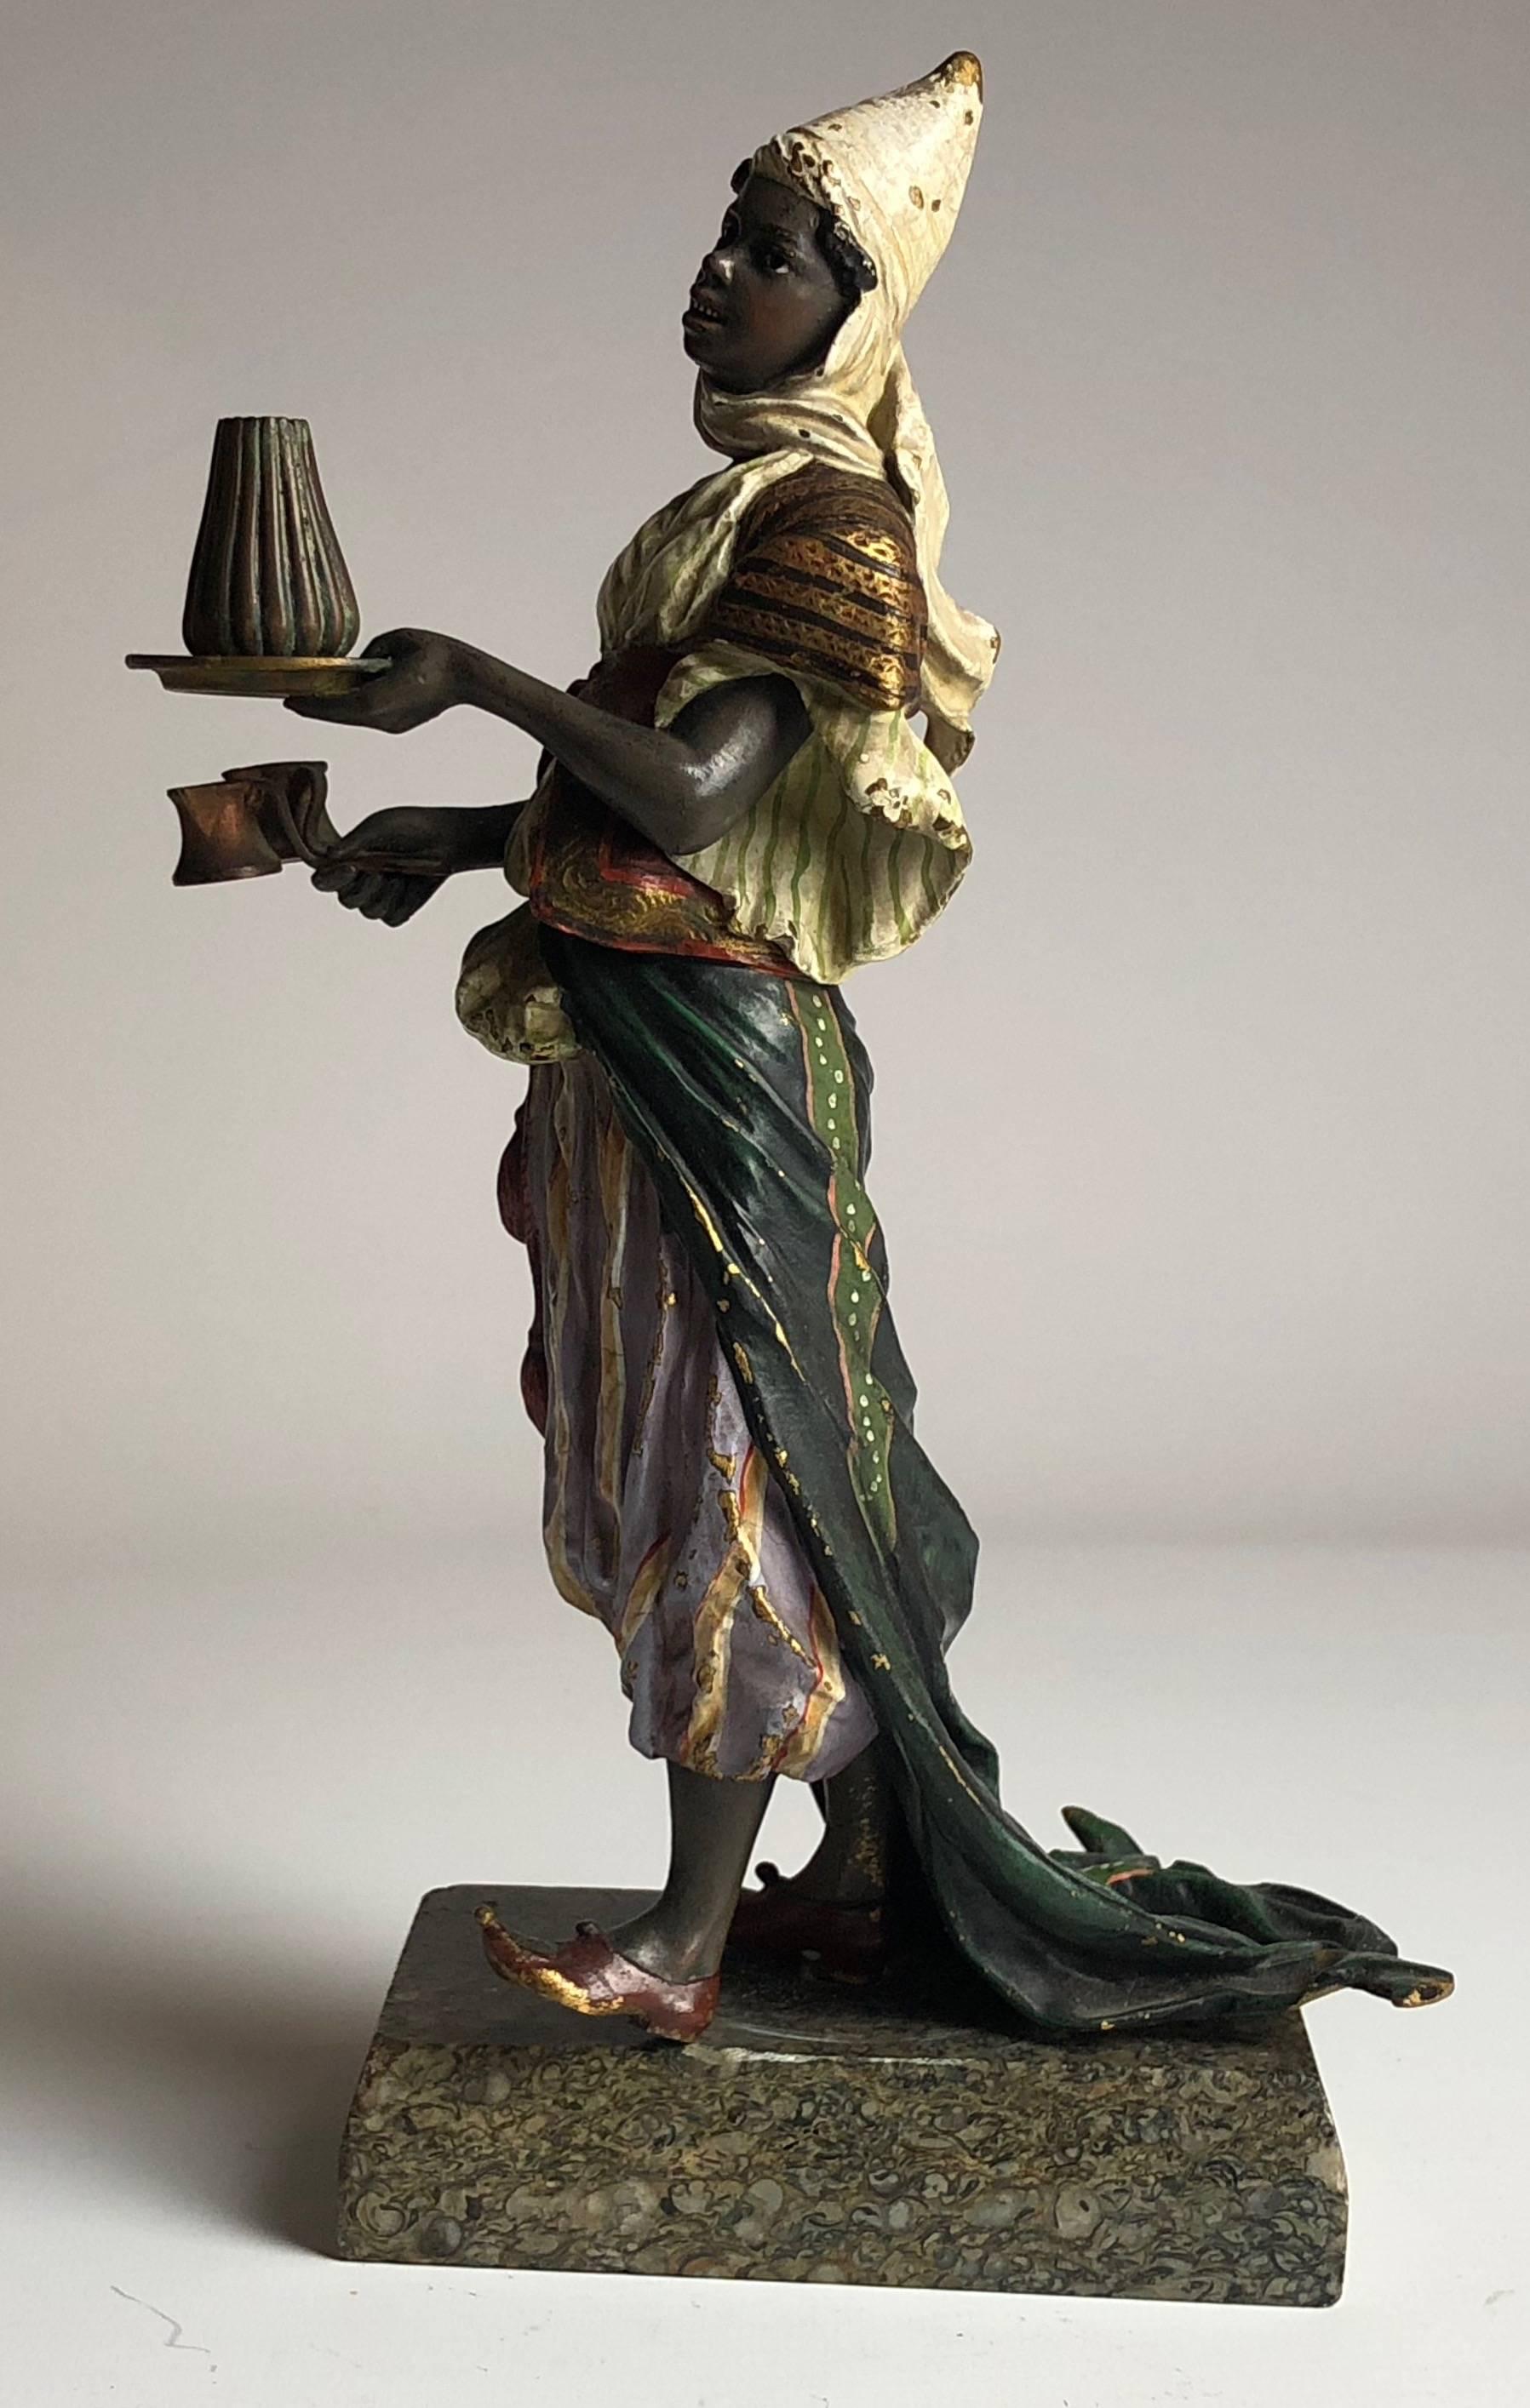 A superb early 20th century cold painted and gilded Austrian bronze study

It is very unusual to see gilding like this on a cold painted bronze figure.

Mounted on a mineral base
the boy stands 11